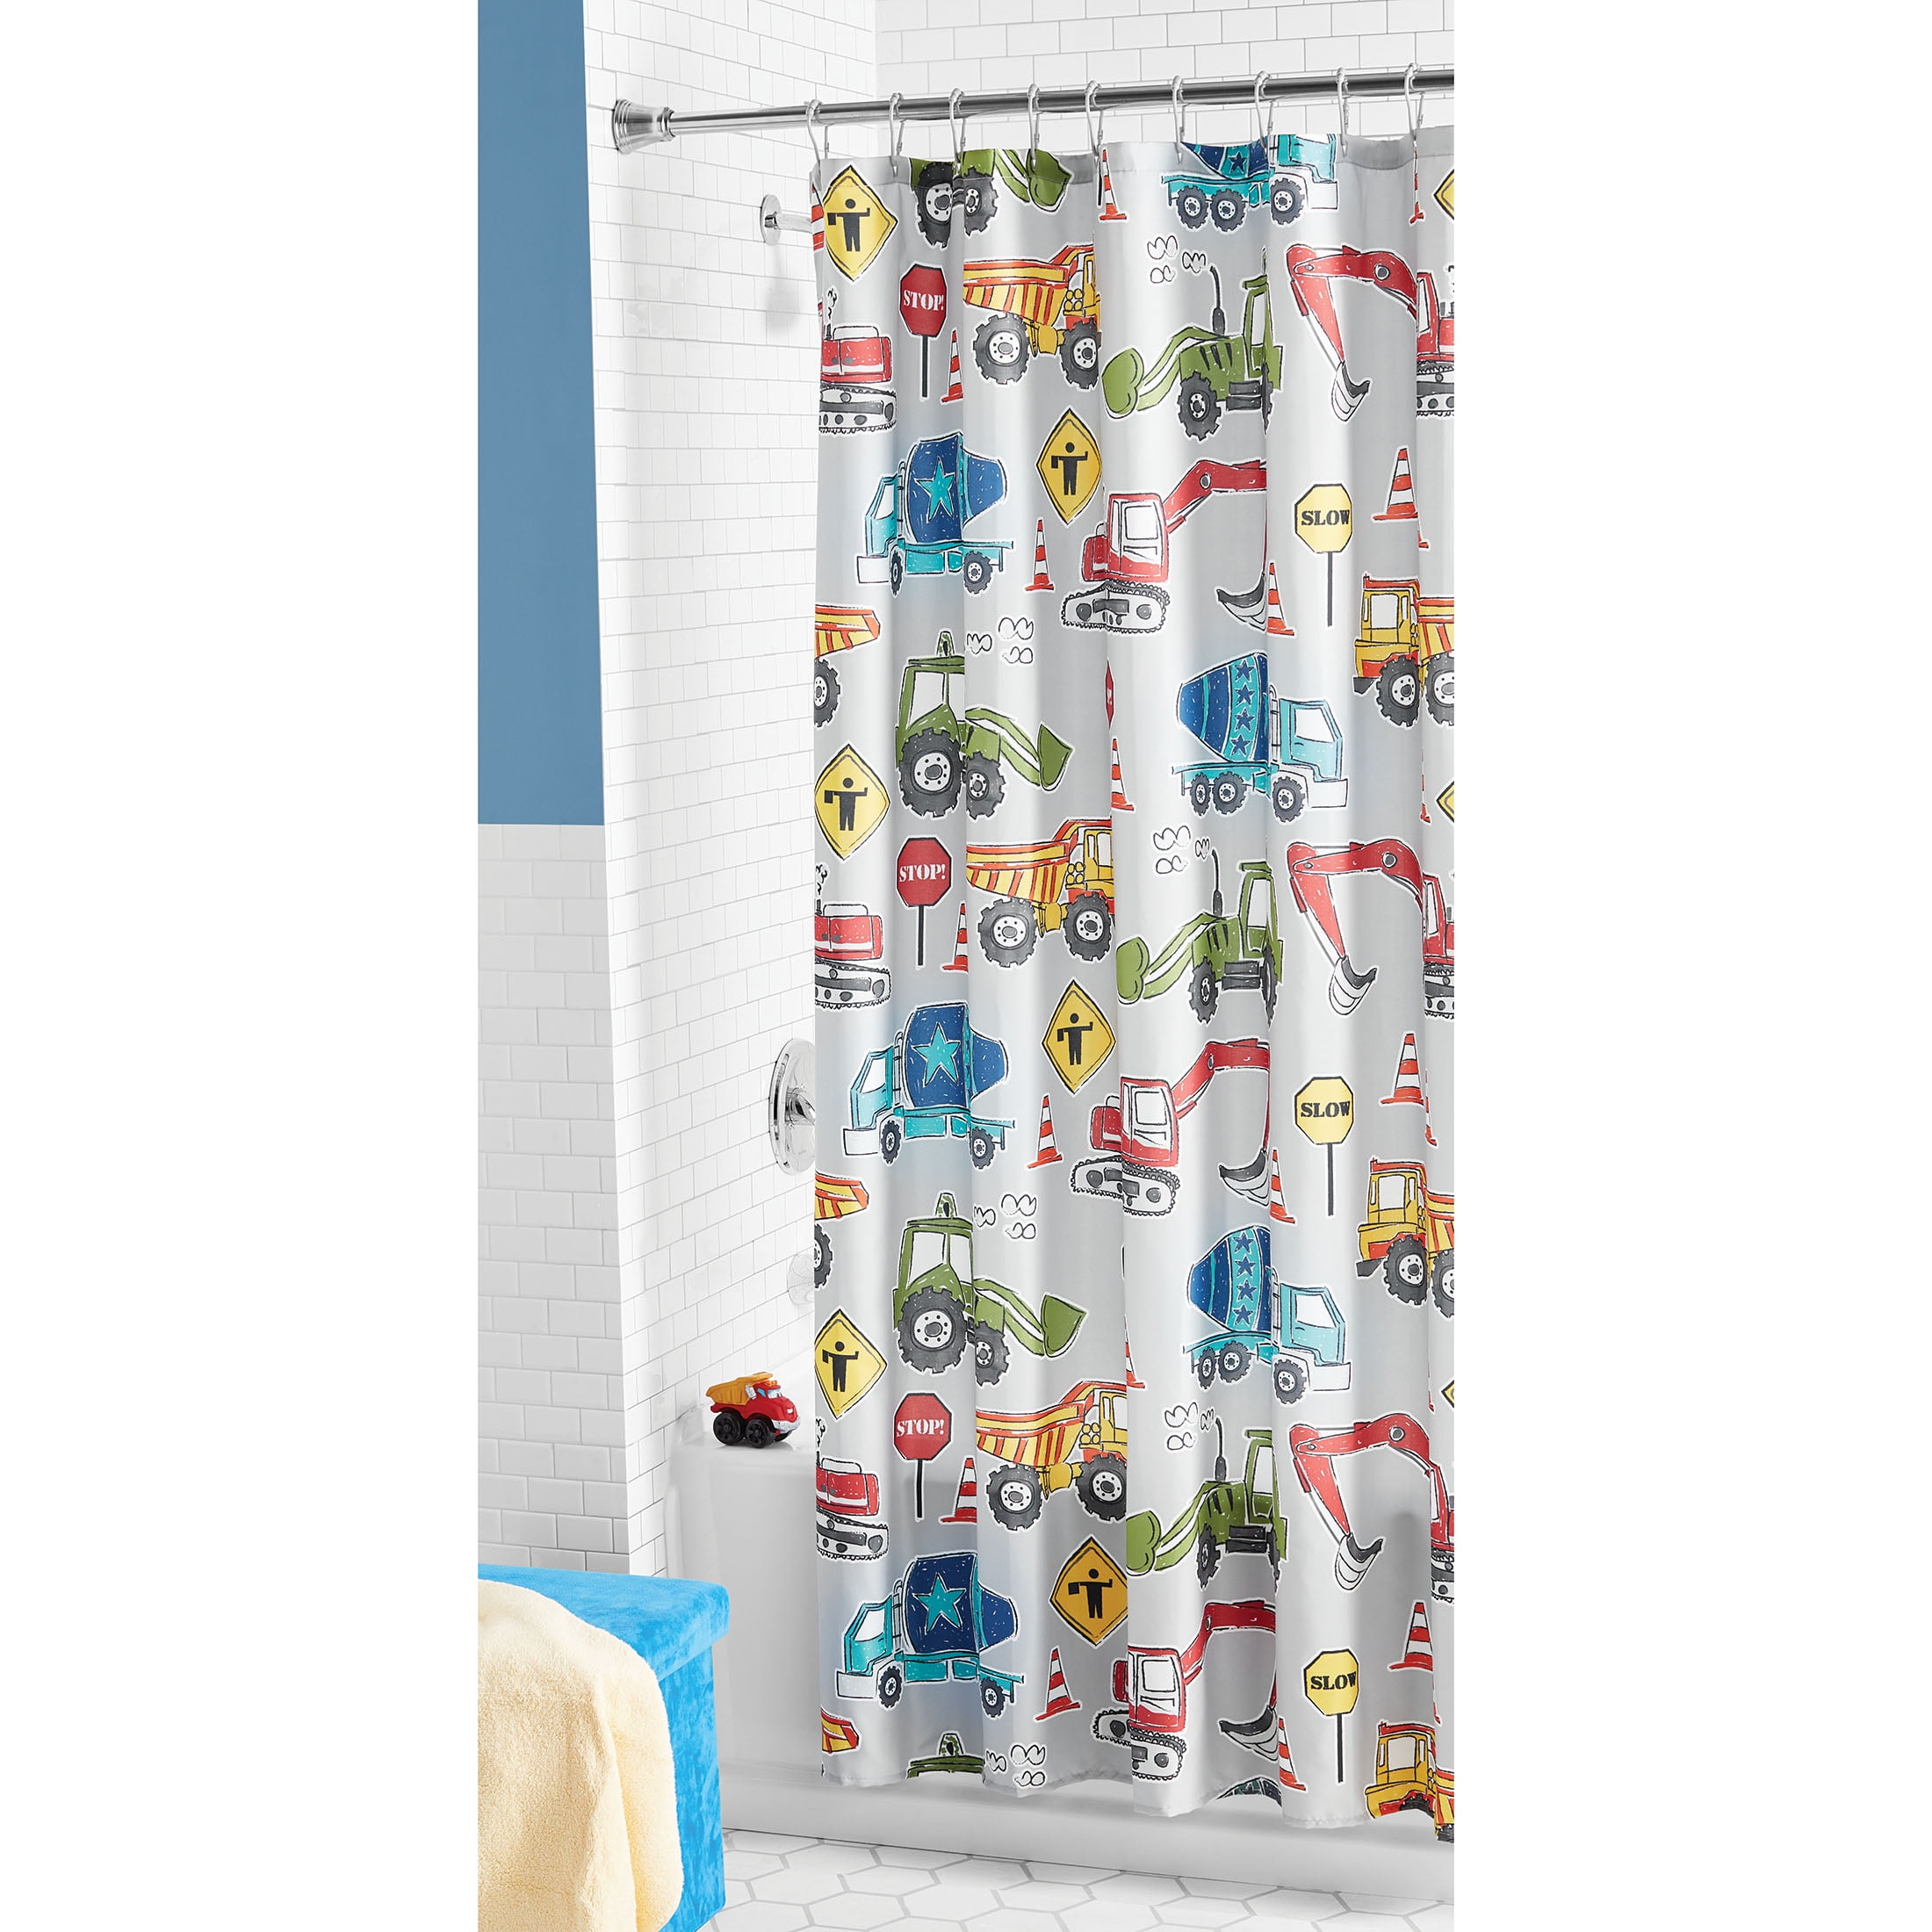 Construction Fabric Shower Curtain By, Ikea Kids Shower Curtain